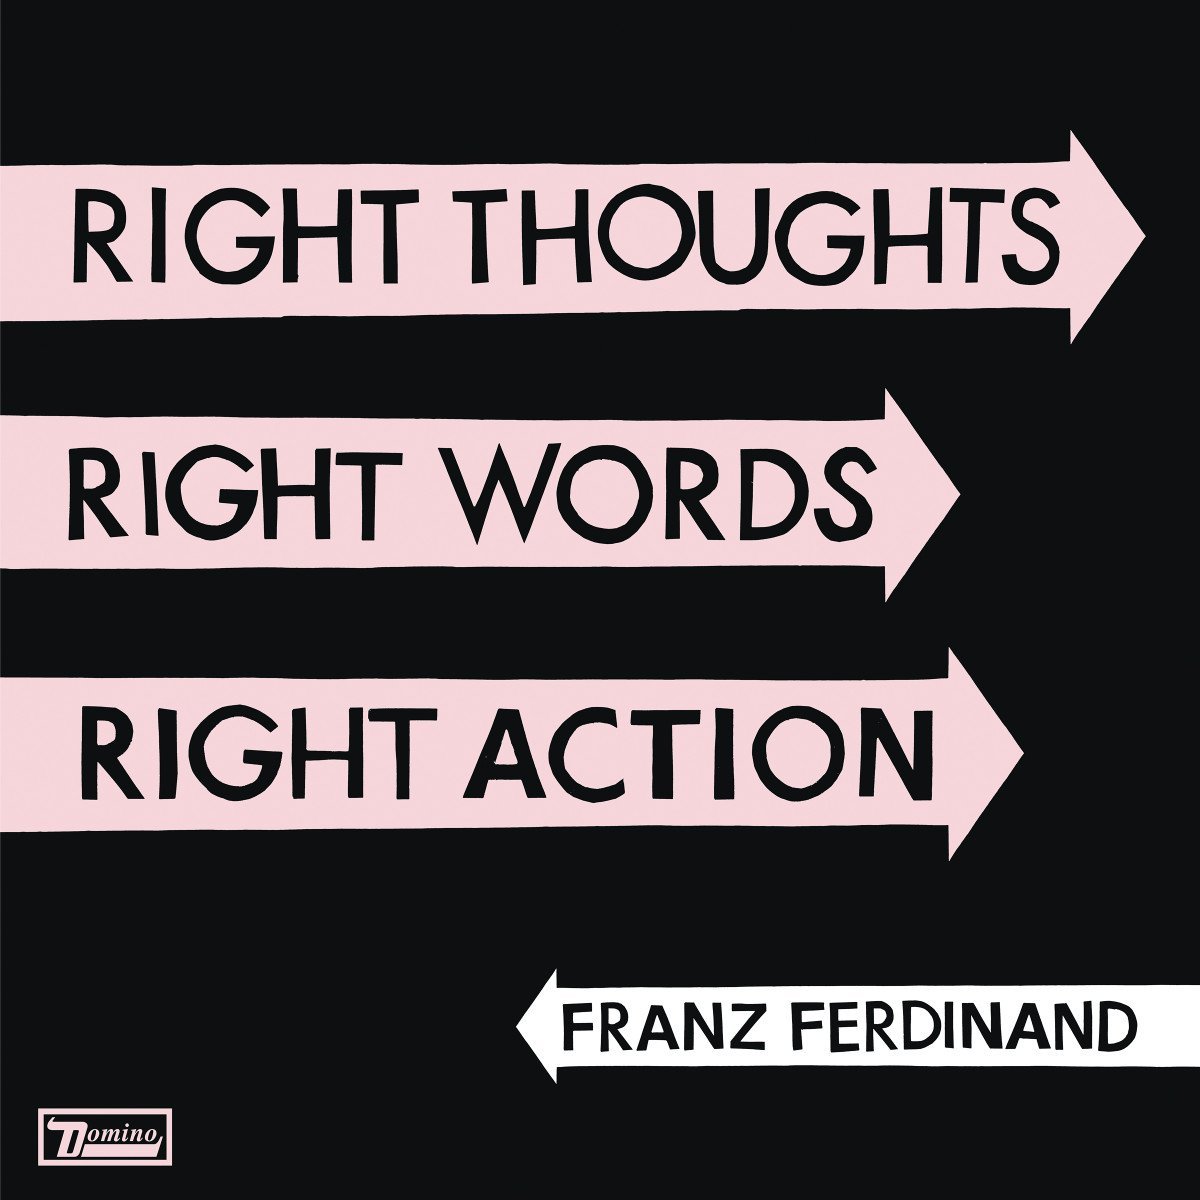 recensione-franz-ferdinand-right-thoughts-right-words-right-action